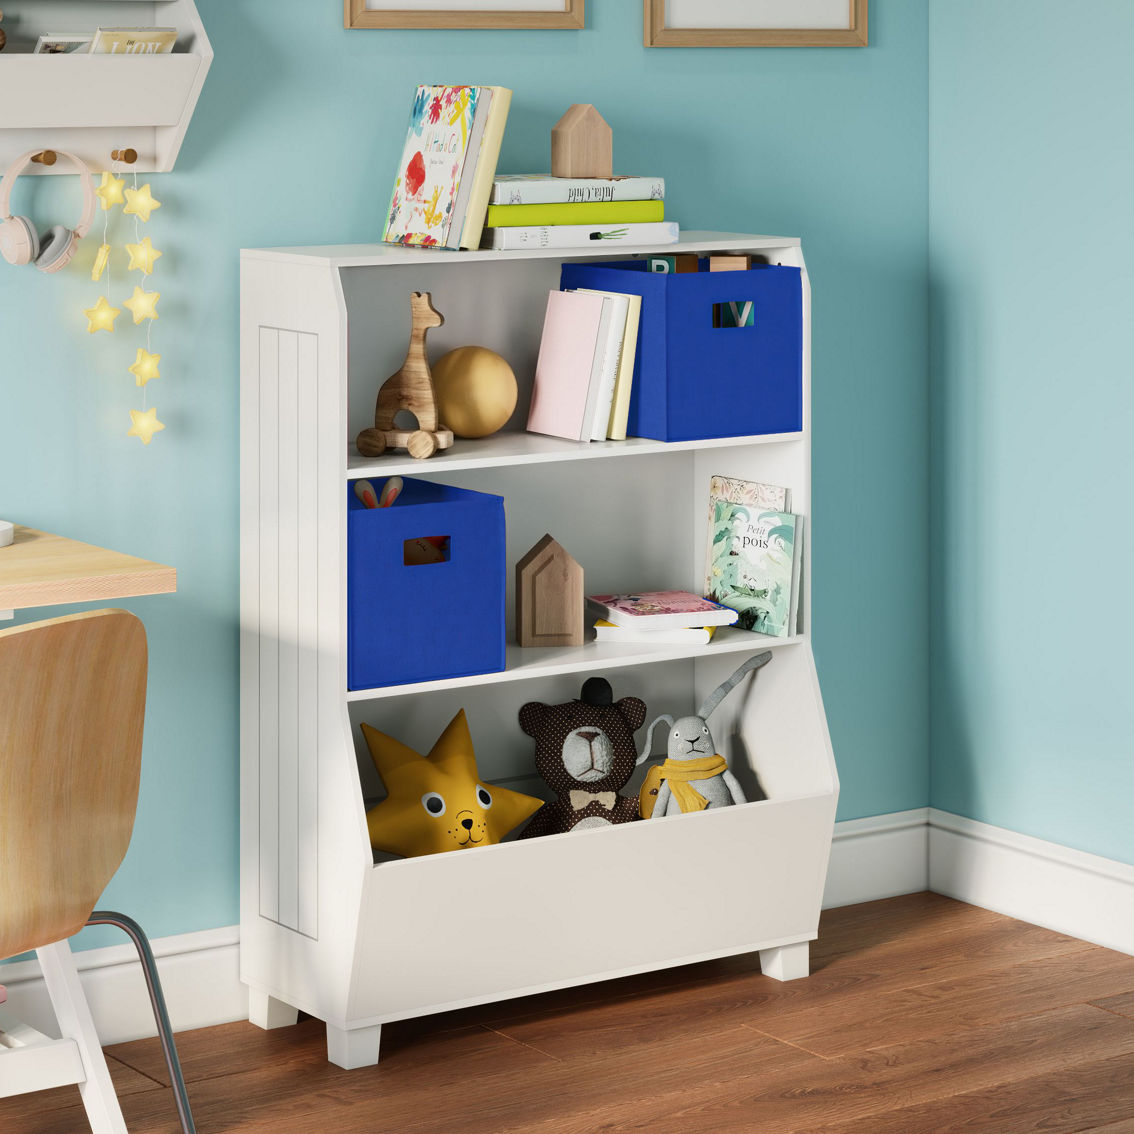 RiverRidge Kids 34in Bookcase with Toy Organizer and 2pc Bins - Image 2 of 5